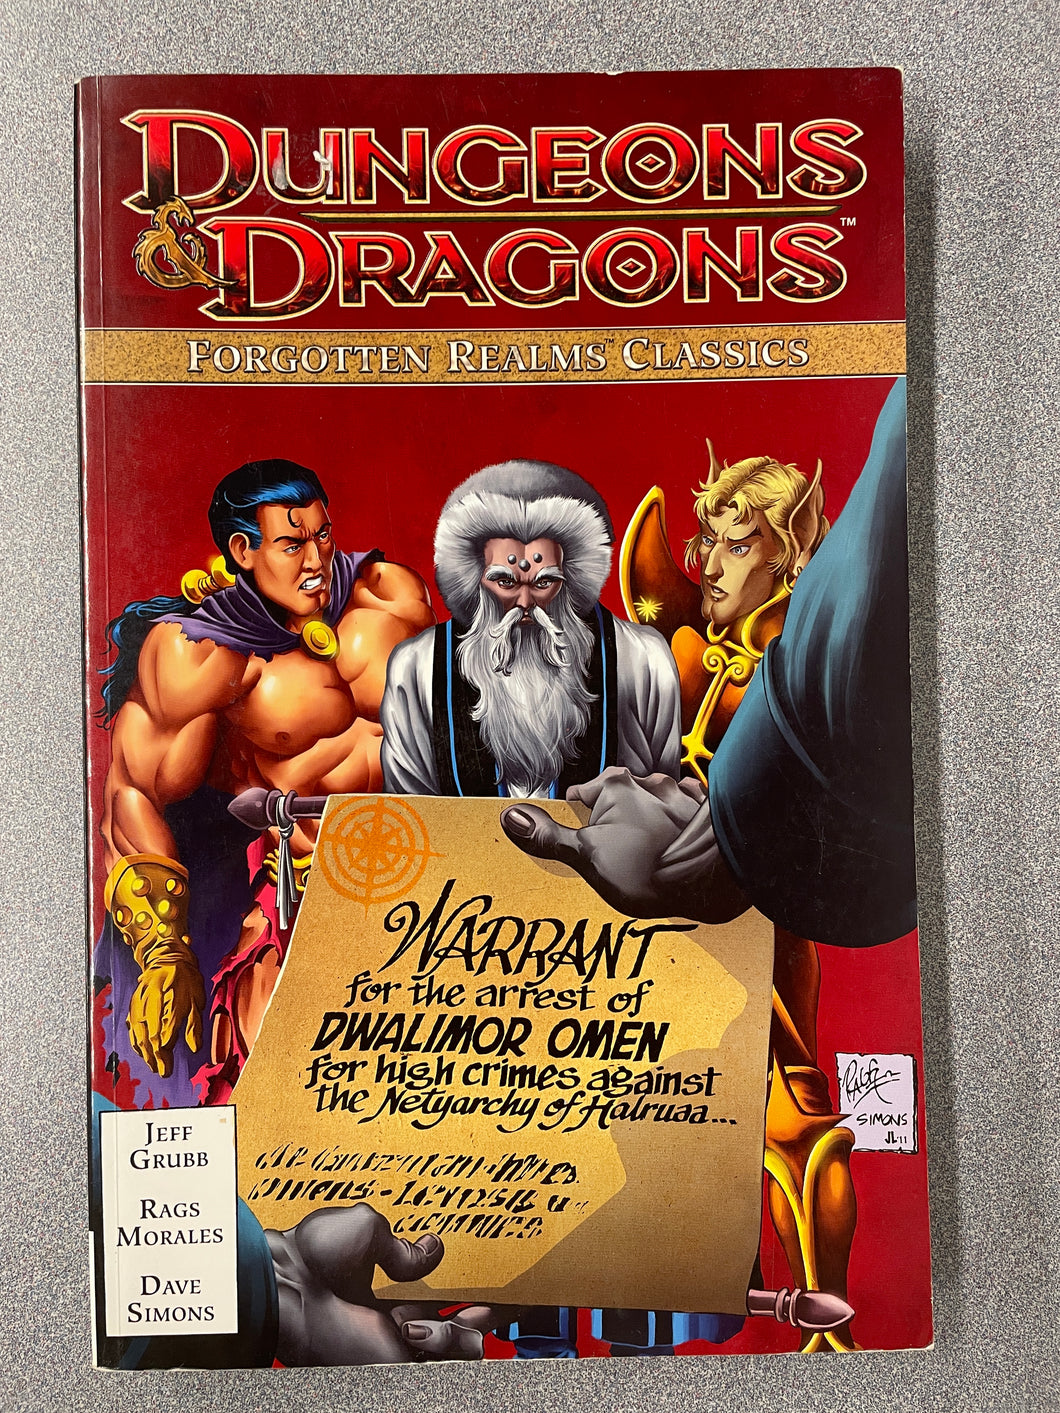 Dungrons & Dragons: Forgotten Realms Classics, Jeff Grubb, Rags Morales and Dave Simons[2011] GN 11/23